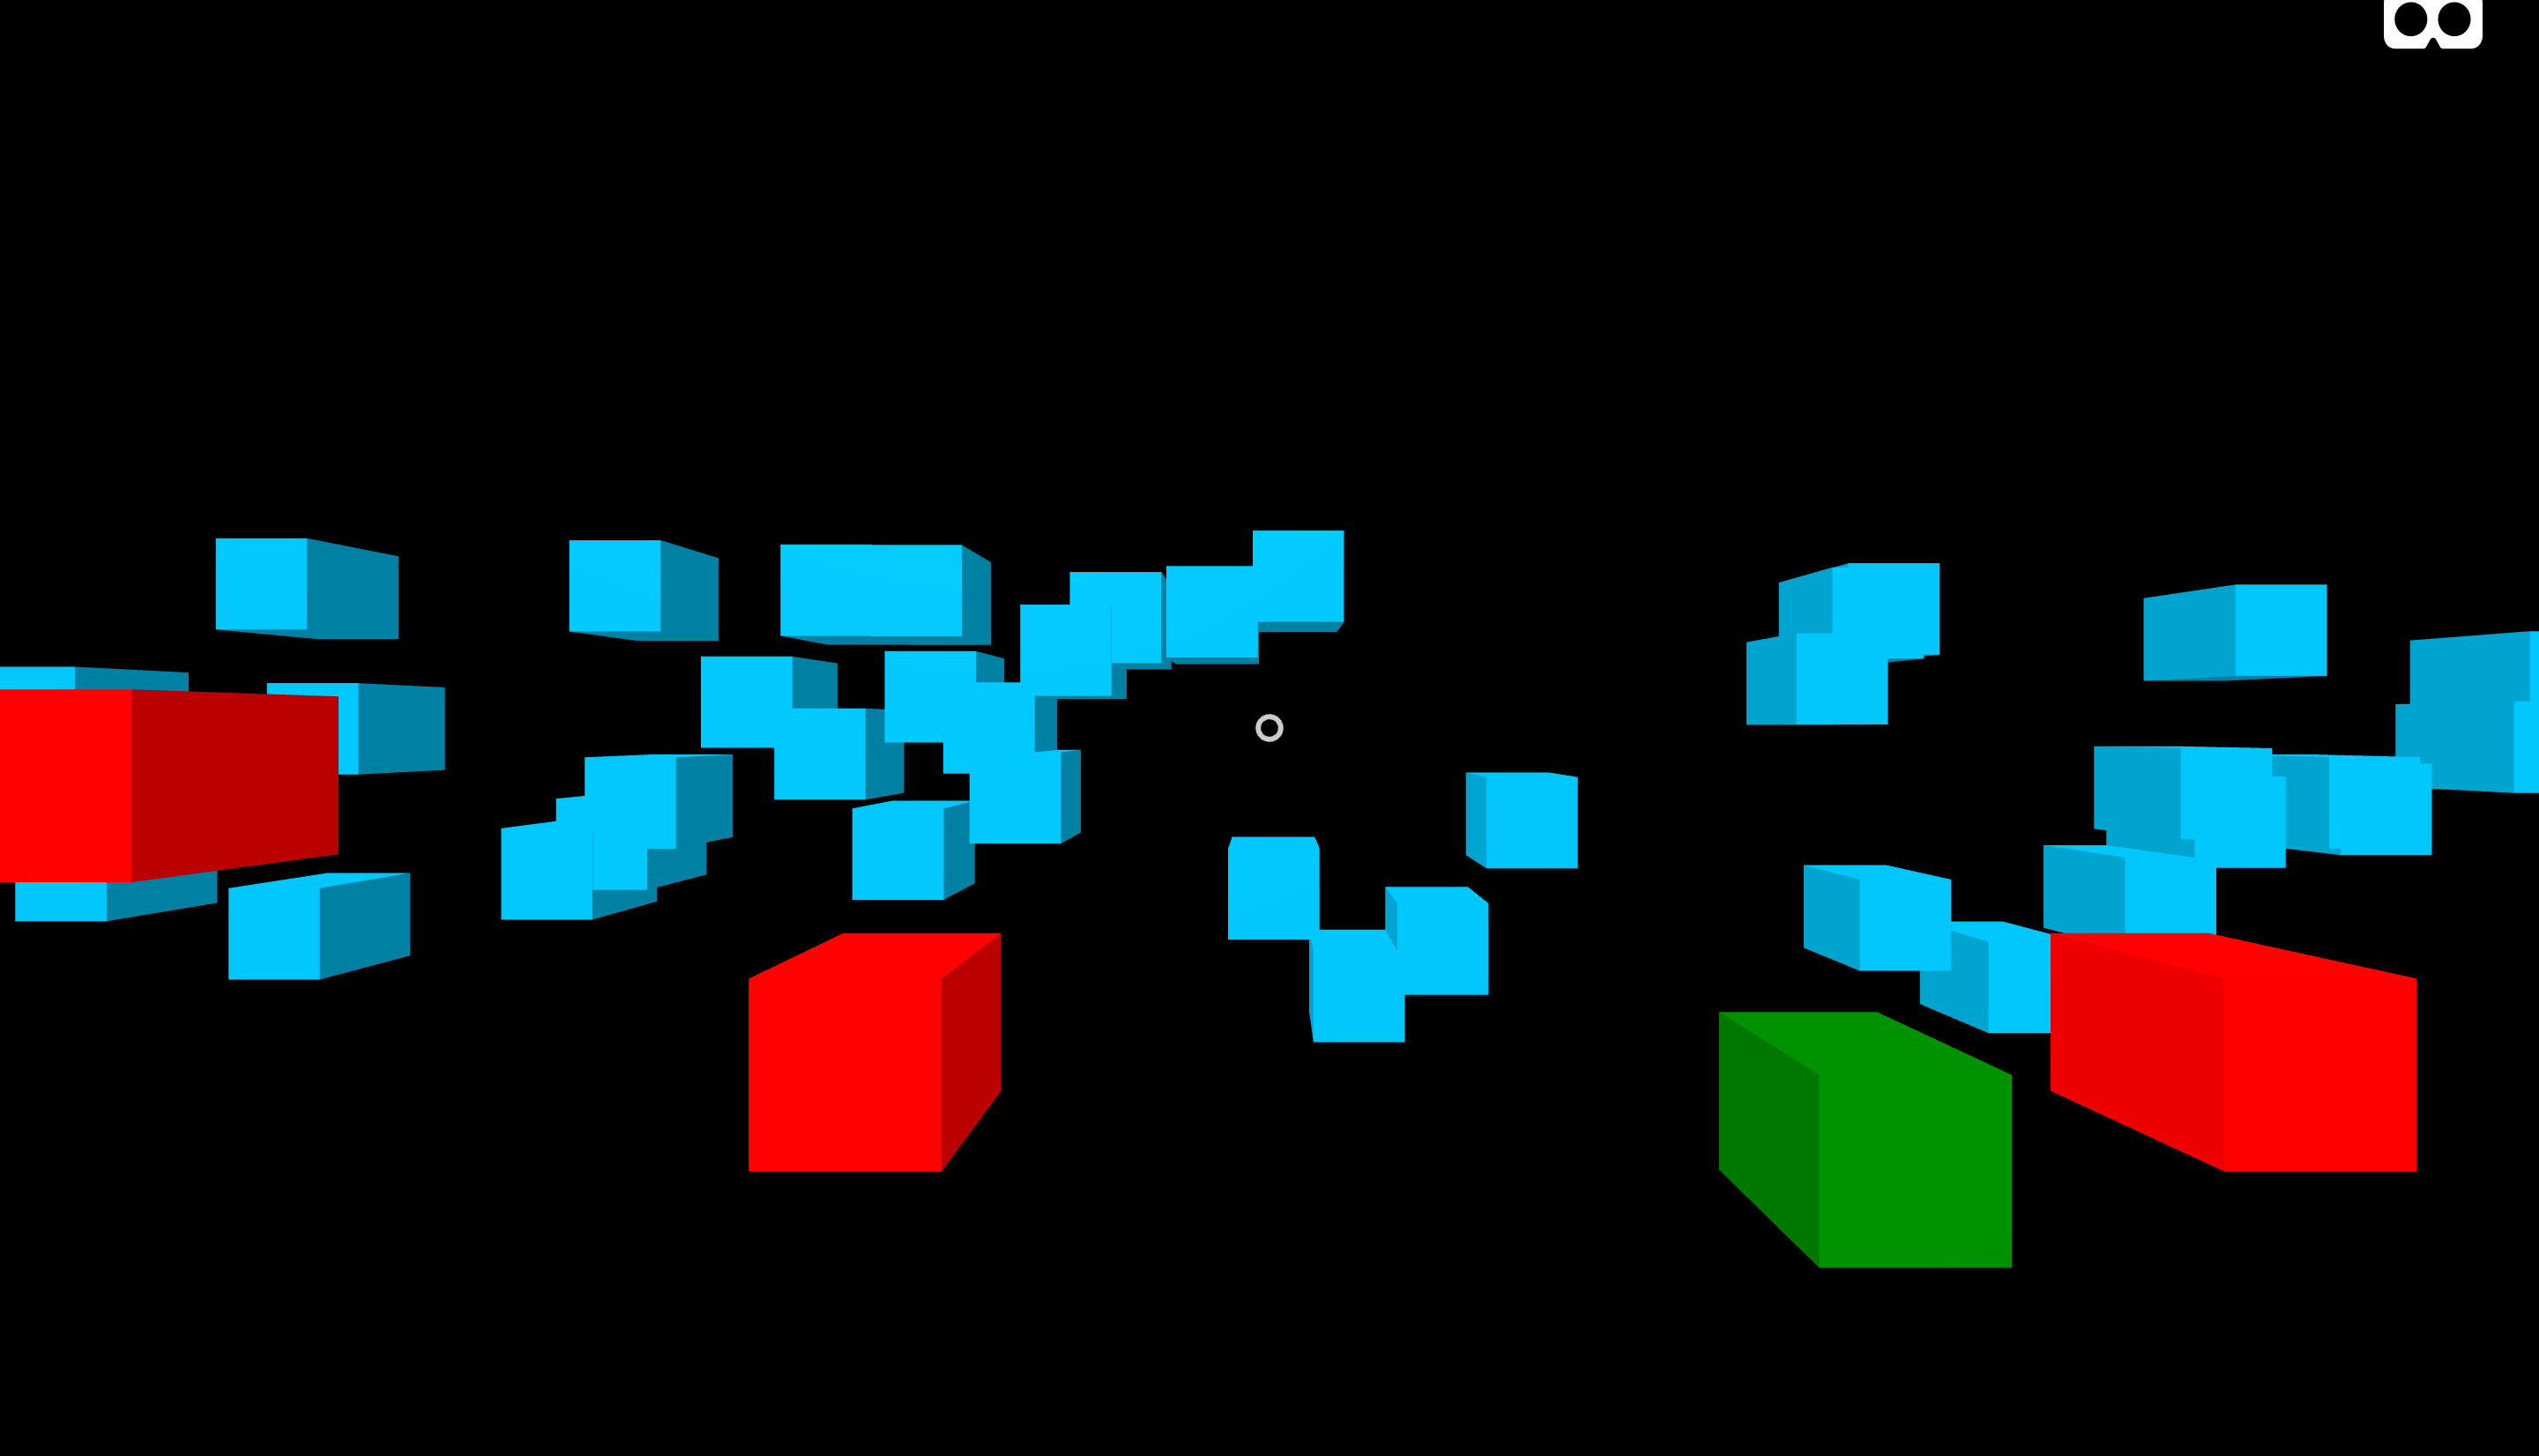 A snapshot of the web, a lot of blue, red, and green cubes are displayed over a black background